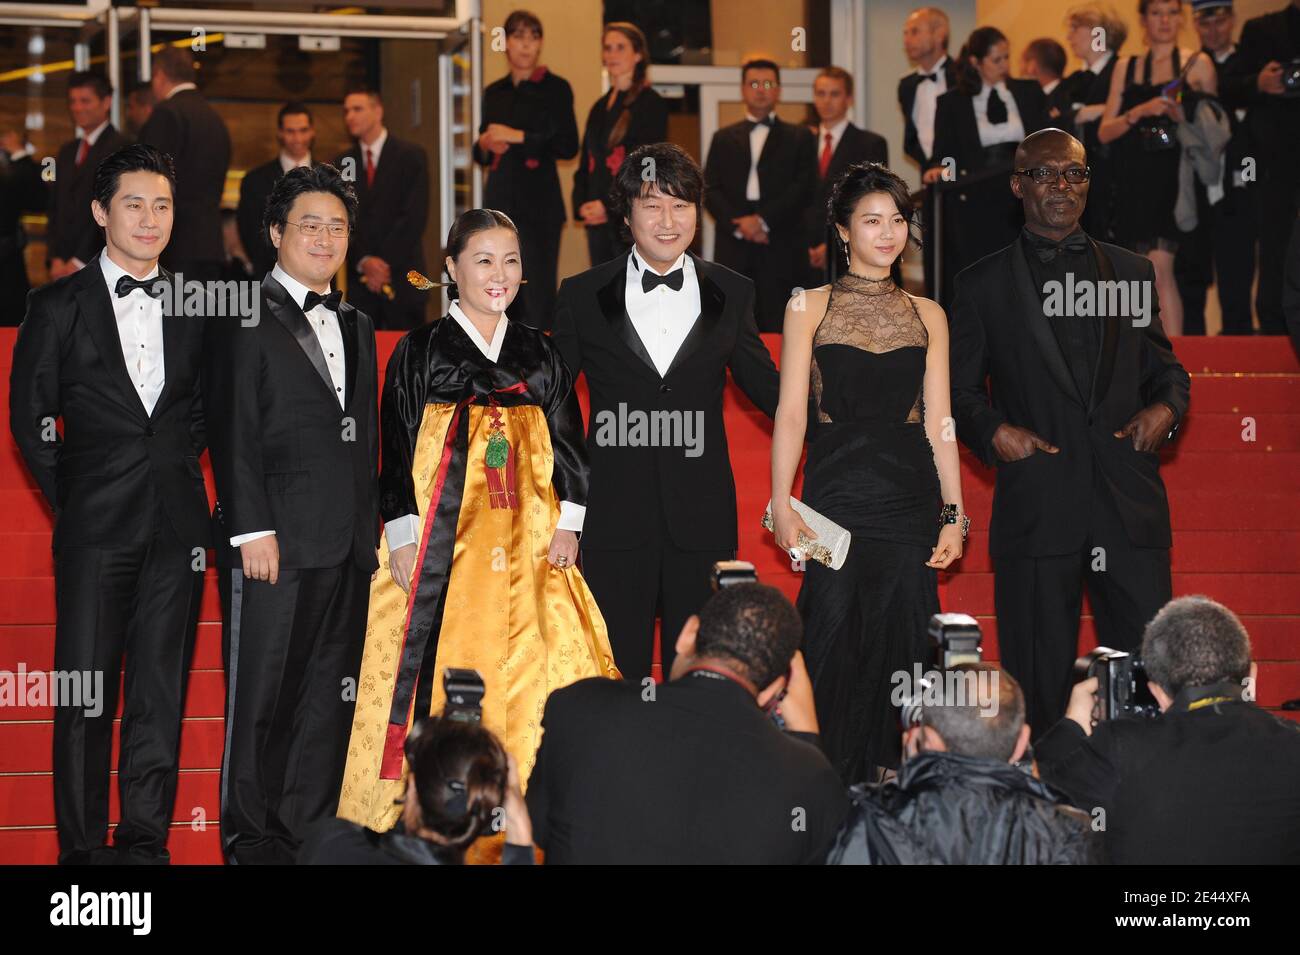 South-Korean director Chan-Wook Park (2ndL), Kim Ok-Bin (2ndR), Kim Hae-Sook (C), Song Kang-Ho (3ndR) and Shin Ha-Kyun (L) arriving to the screening of 'Thirst' during the 62nd Cannes Film Festival at the Palais des Festivals in Cannes, France on May 15, 2009. Photo by Nebinger-Orban/ABACAPRESS.COM Stock Photo